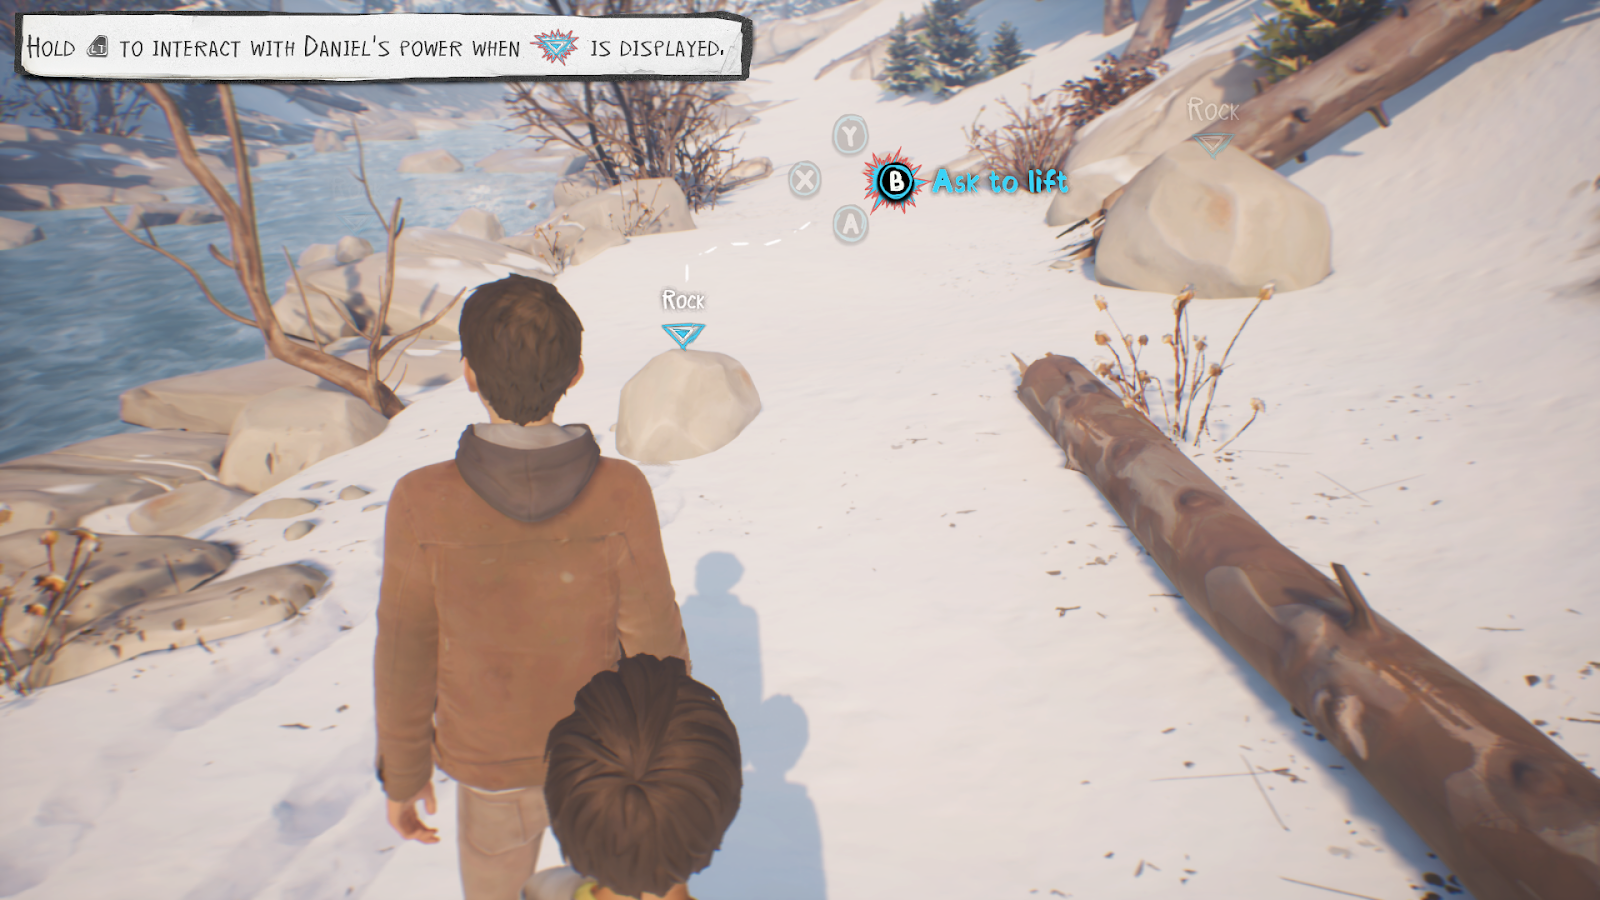 A teenage boy and a smaller boy stand in the snow. In the background is a rock, labelled "Rock" in white writing, with a broken white line leading to a prompt surrounded by blue and pink spikes to press "B" to "Ask to lift". The font is also in bright blue letters. The white writing and label is very difficult to see against the snow. In the upper left corner is prompt that says: "Hold LT to interact with Daniel's power when (the blue and pink spiky icon) is displayed."